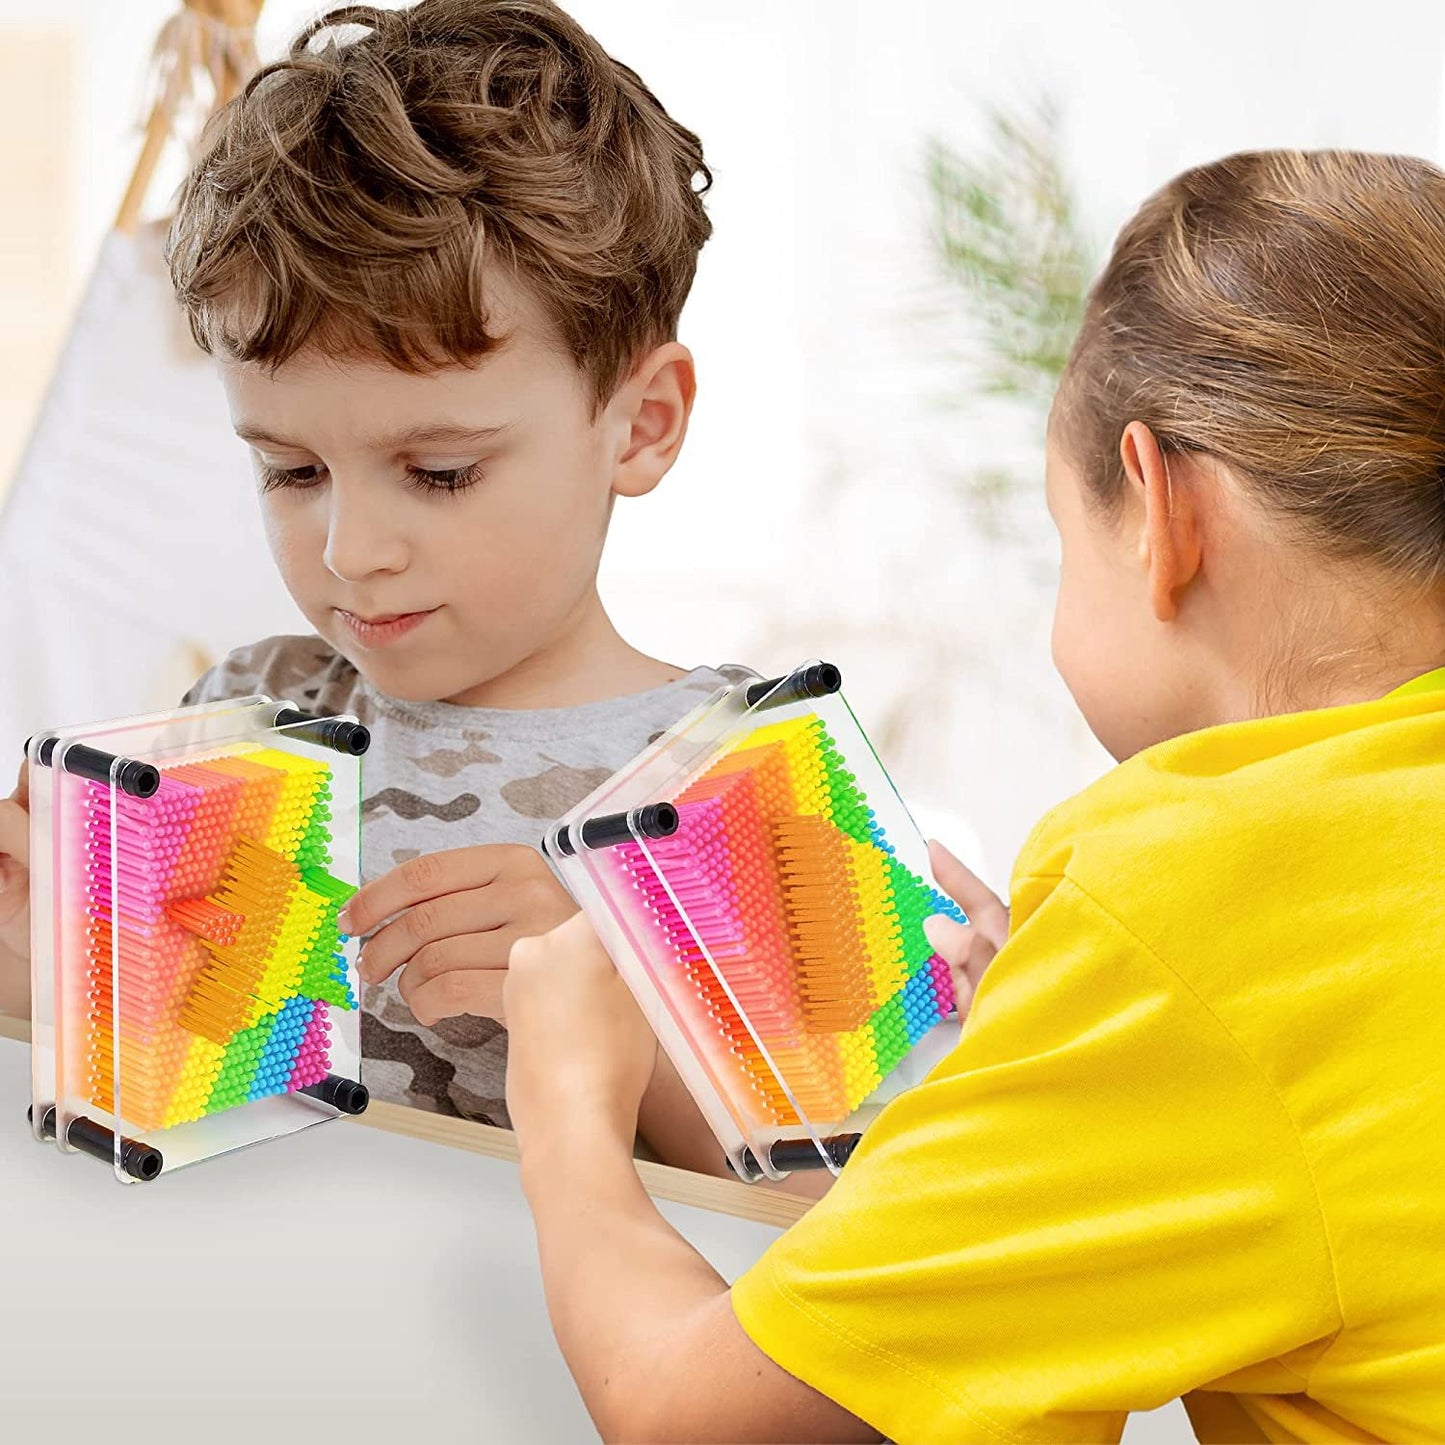 ArtCreativity Rainbow 3D Pin Art Toy, Set of 2 Colorful Plastic Pin Art Board Game Sensory Toy for Kids & Adults, Classic Pin Impression Art Sculpture Toys, Novelty Gift Set, Baby Girl Boy Birthday Gifts Party Favors, Fidget Toys